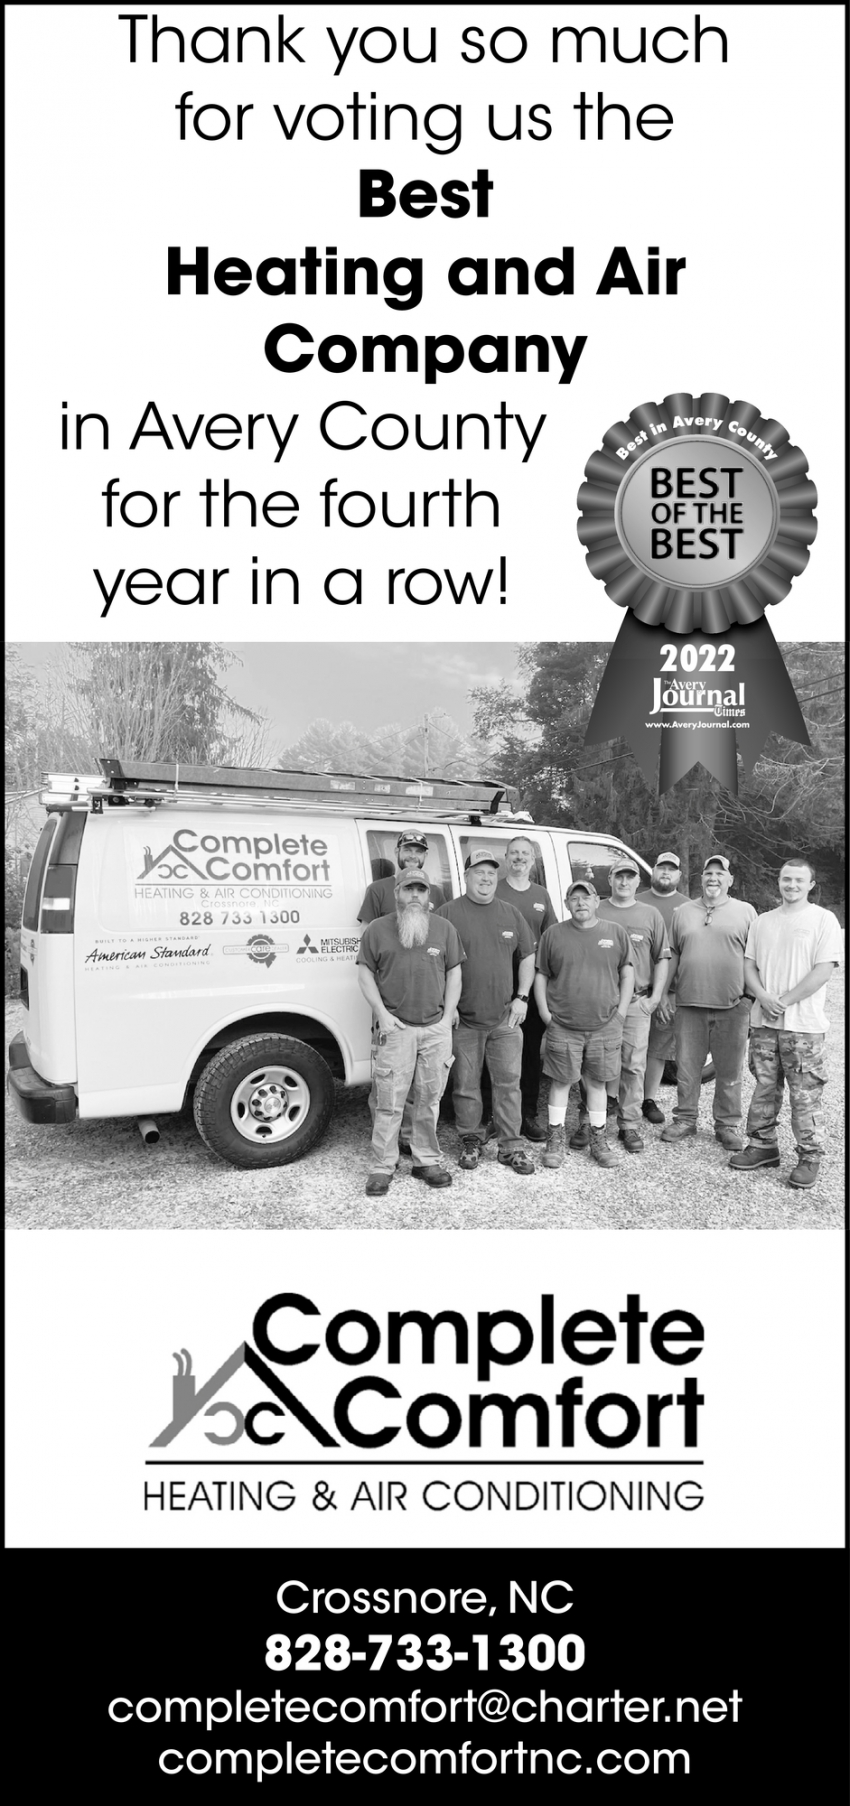 Thank You for Voting Us Best Heating & Air Company in Avery County!